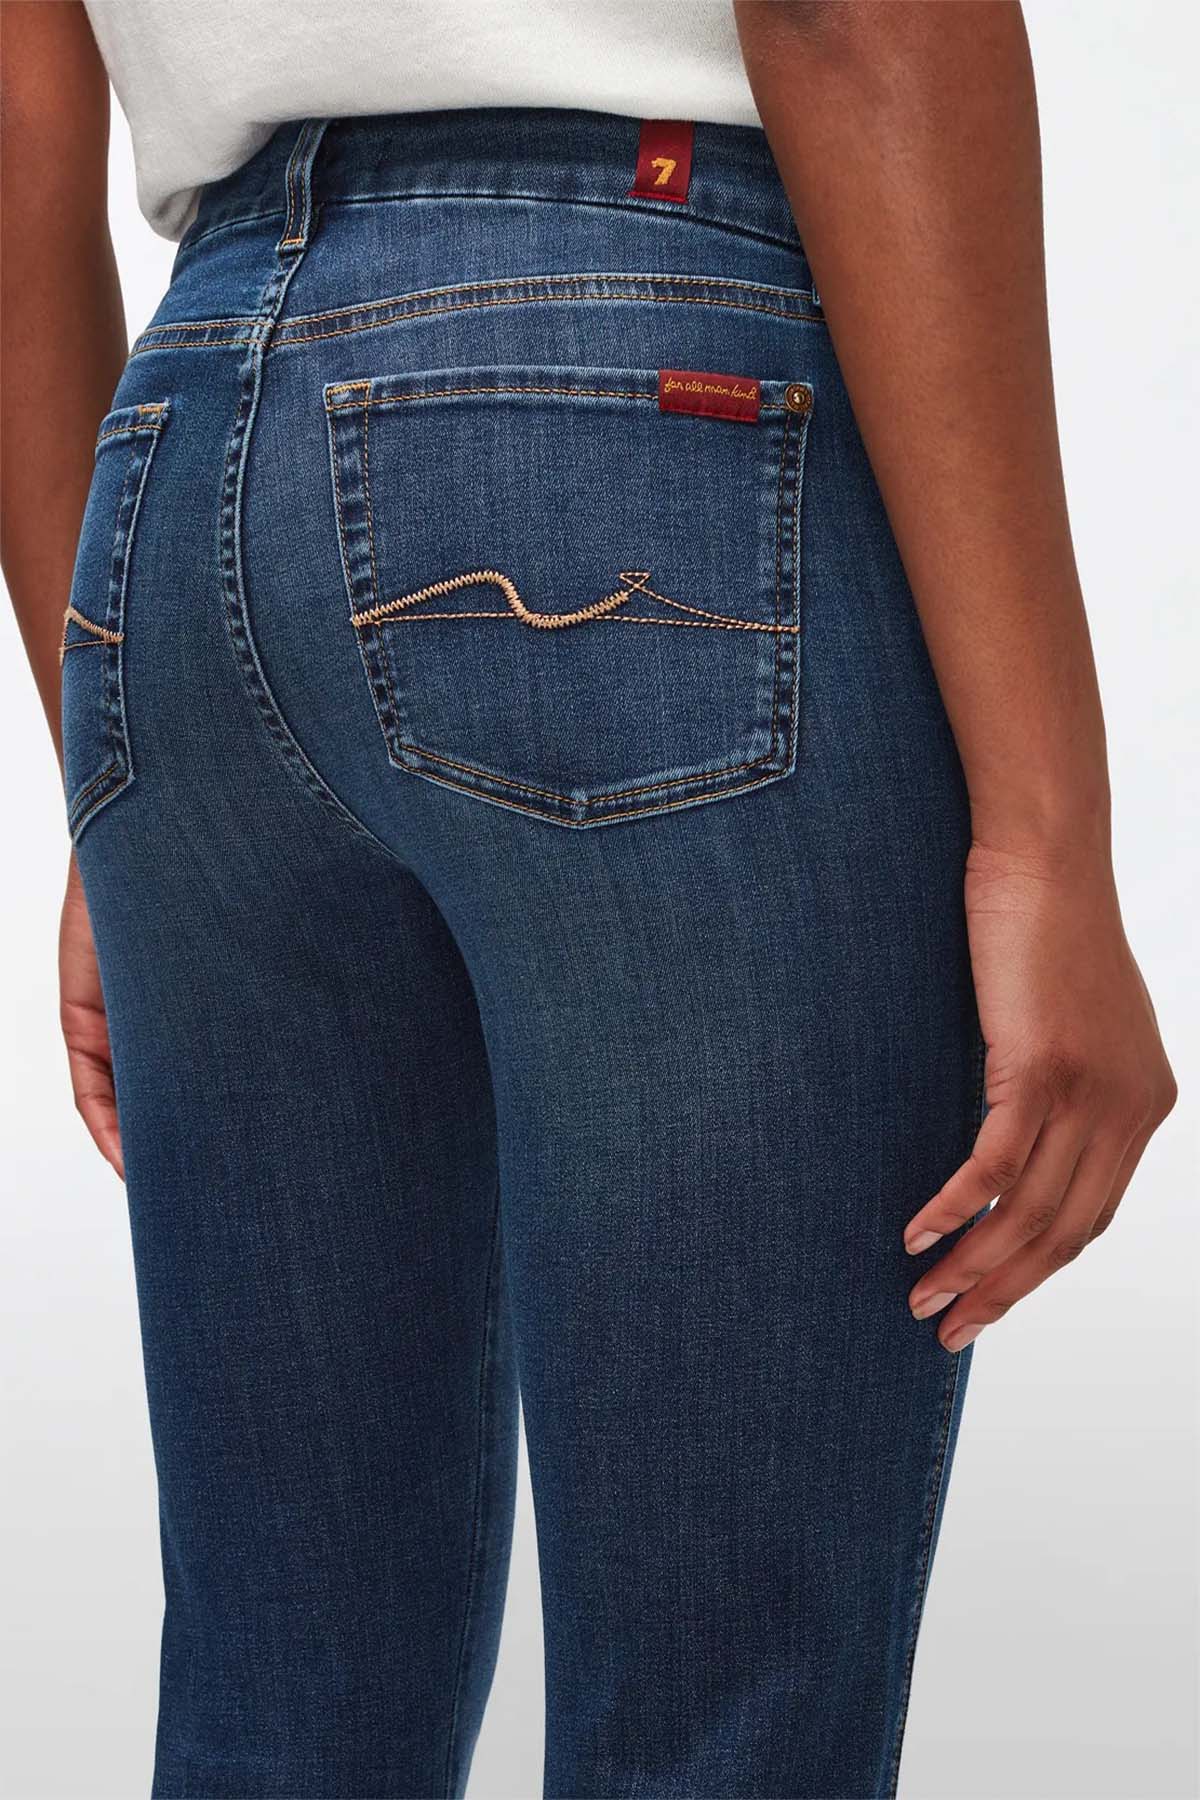 7 For All Mankind Kimmie B Air Straight Fit Jeans-Libas Trendy Fashion Store